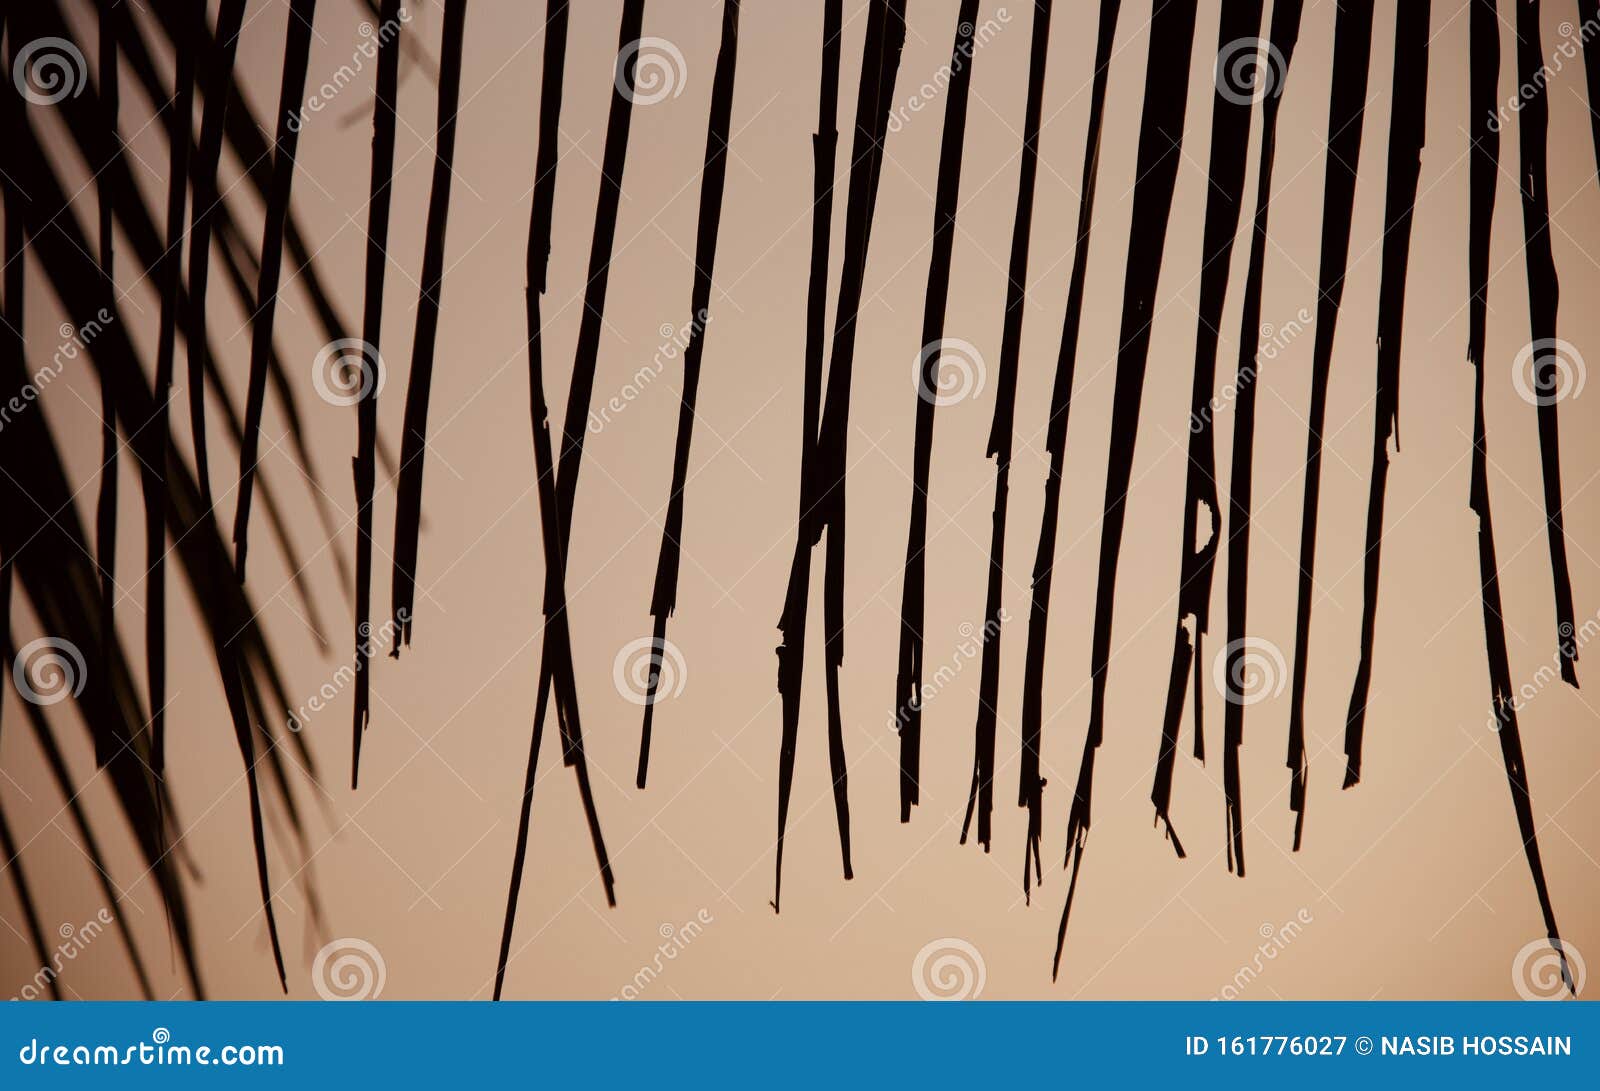 Hanging Leaves of Palm Tree with Dark Sky Background Stock Image